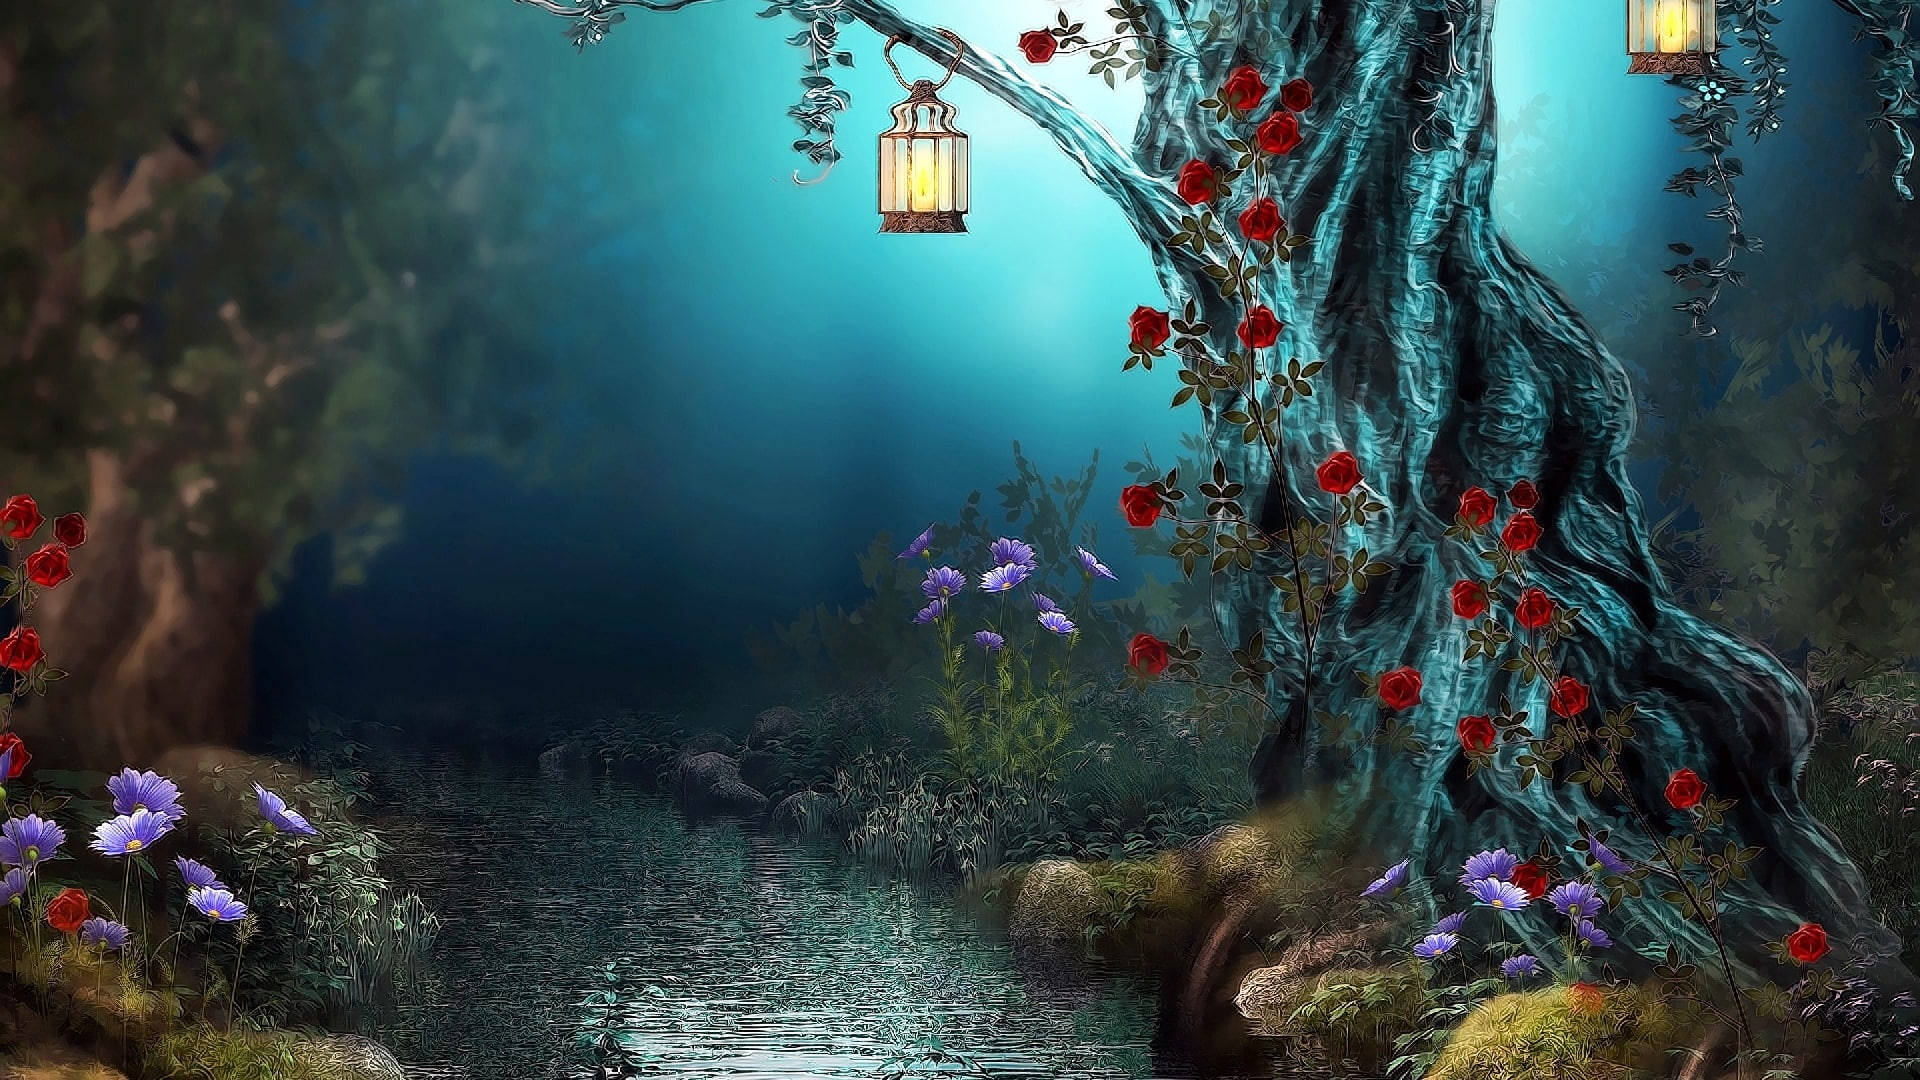 Blue Enchanted Forest Riverbank Wallpaper